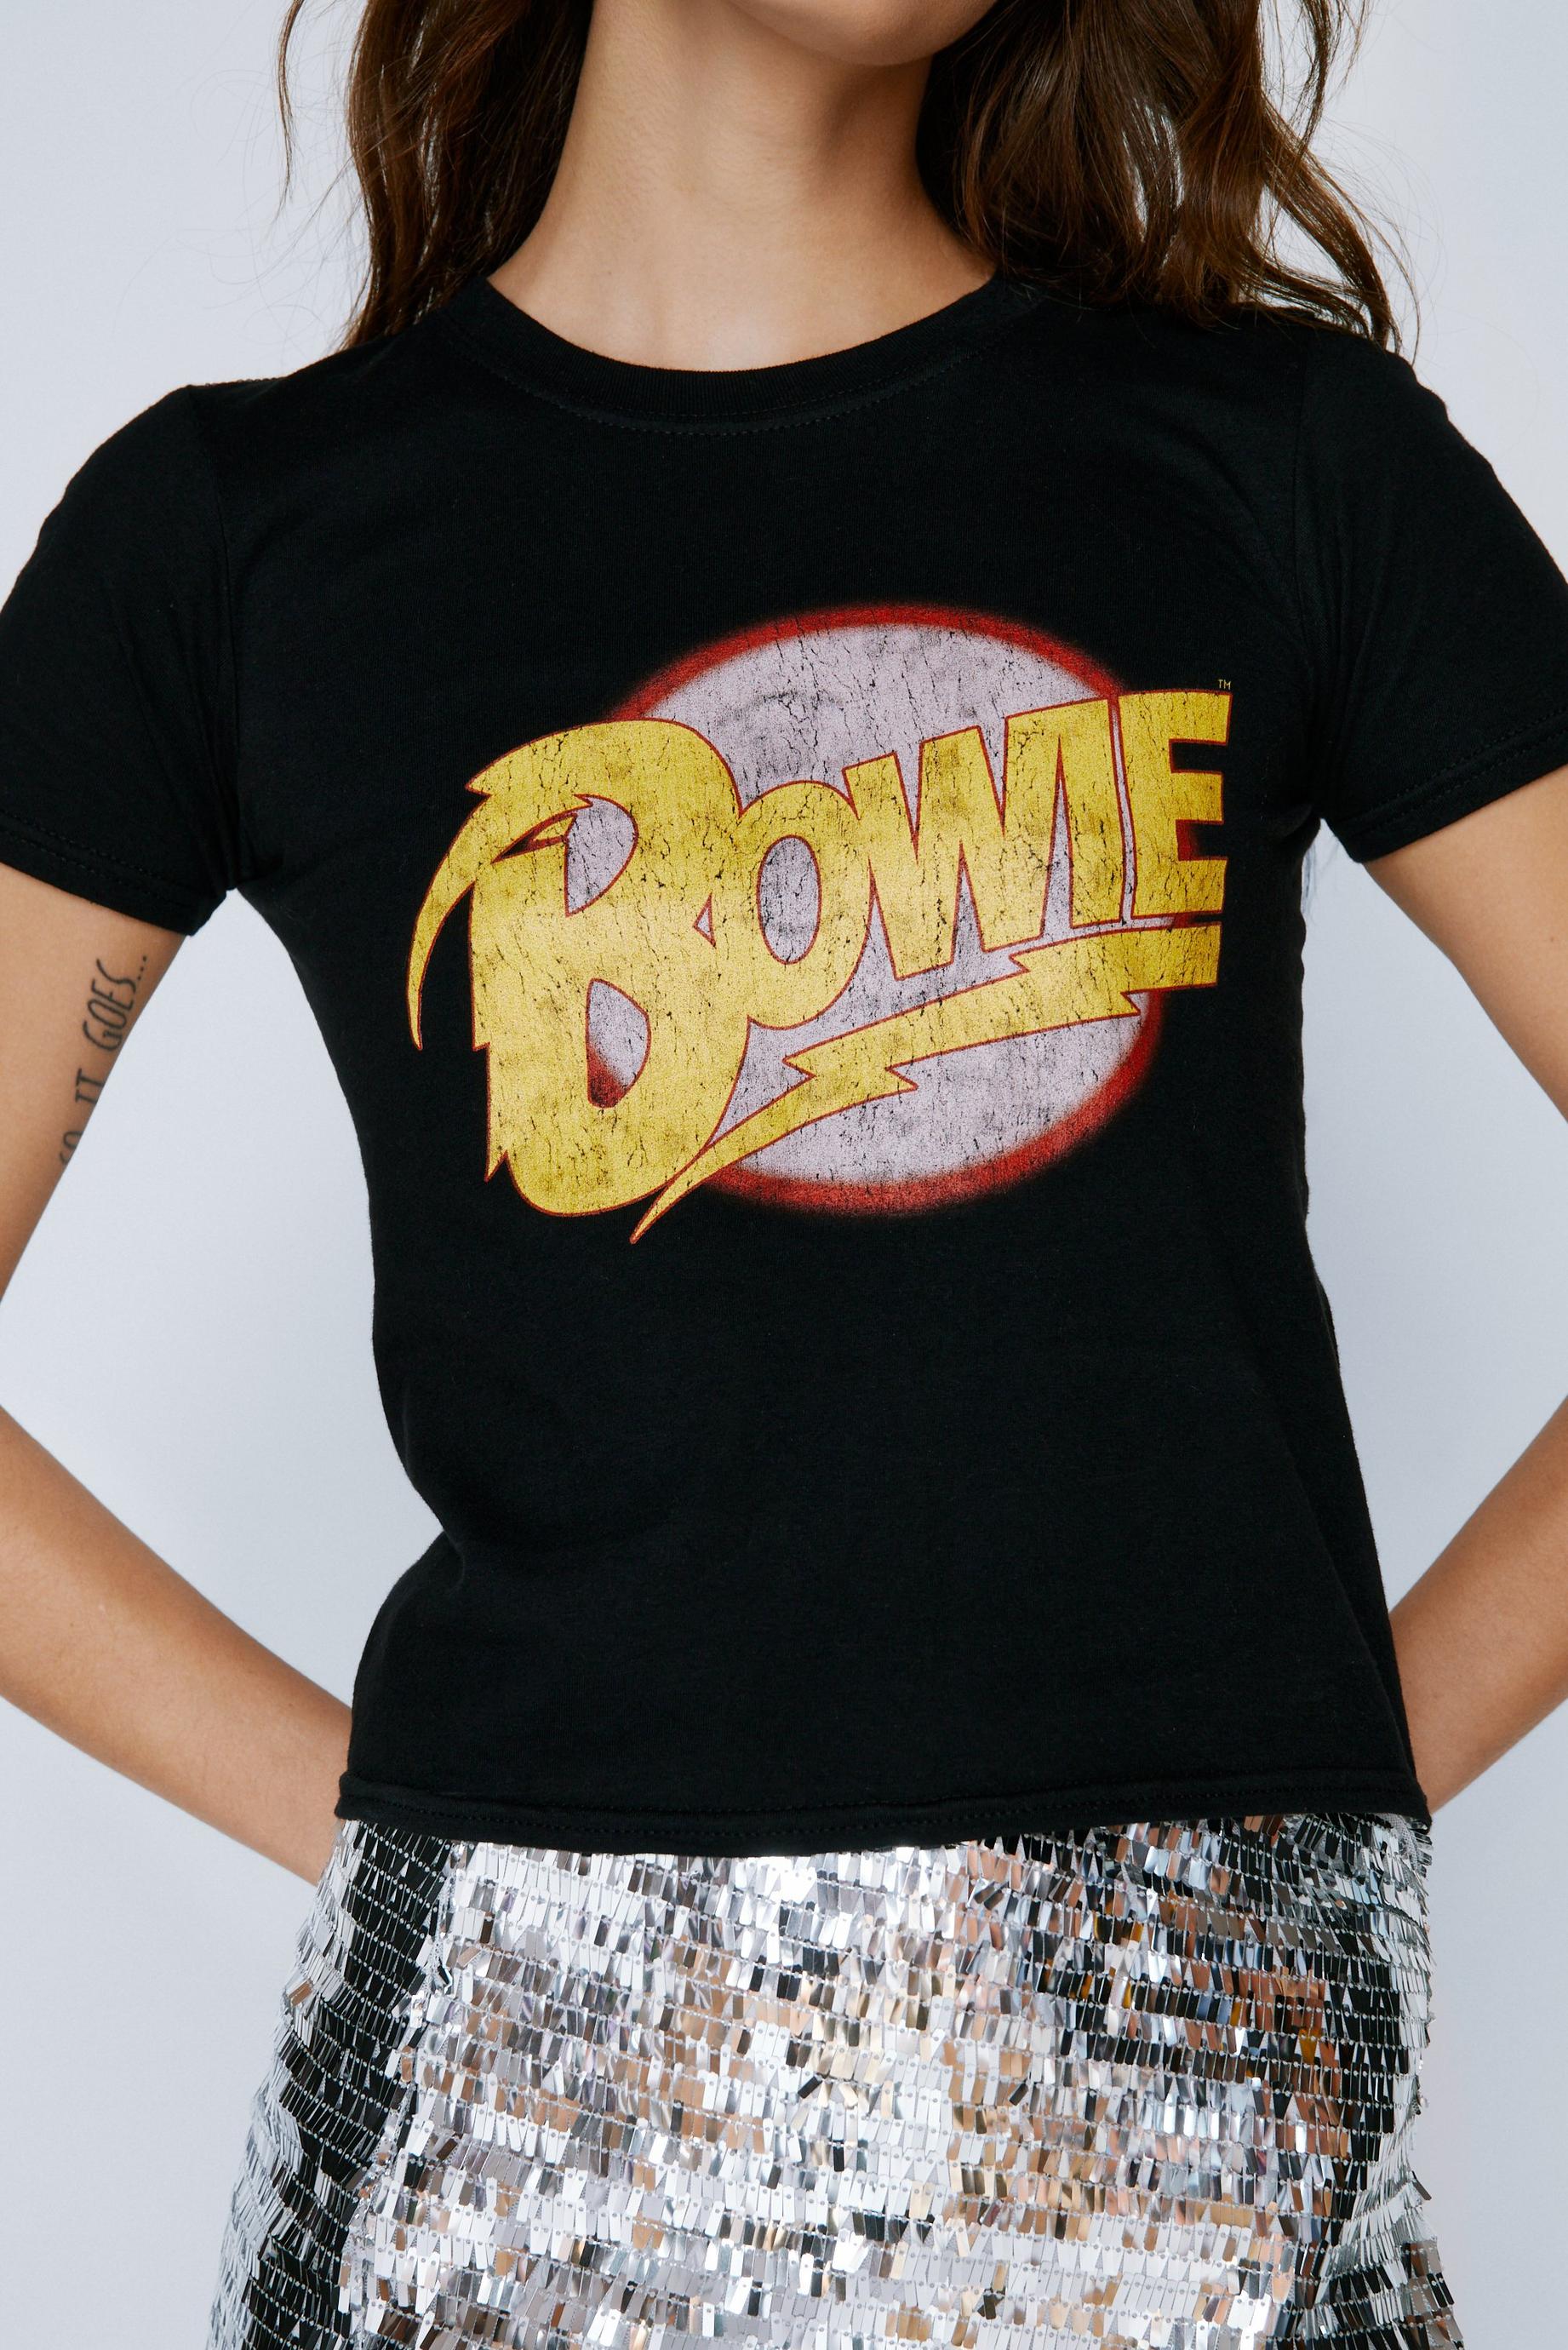 Bowie Graphic Baby Tee